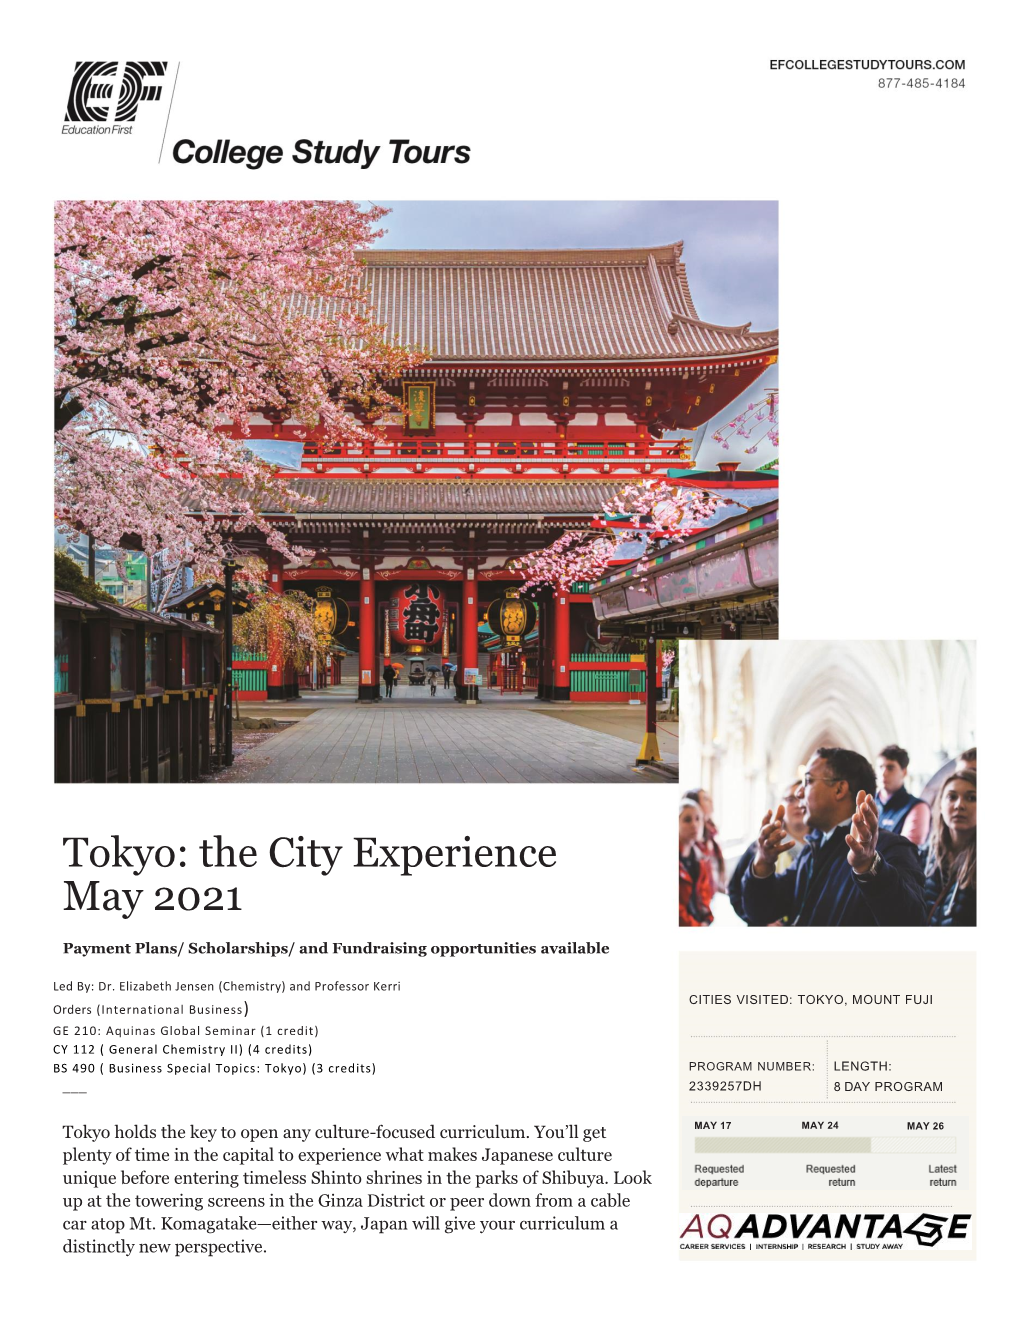 Tokyo: the City Experience May 2021